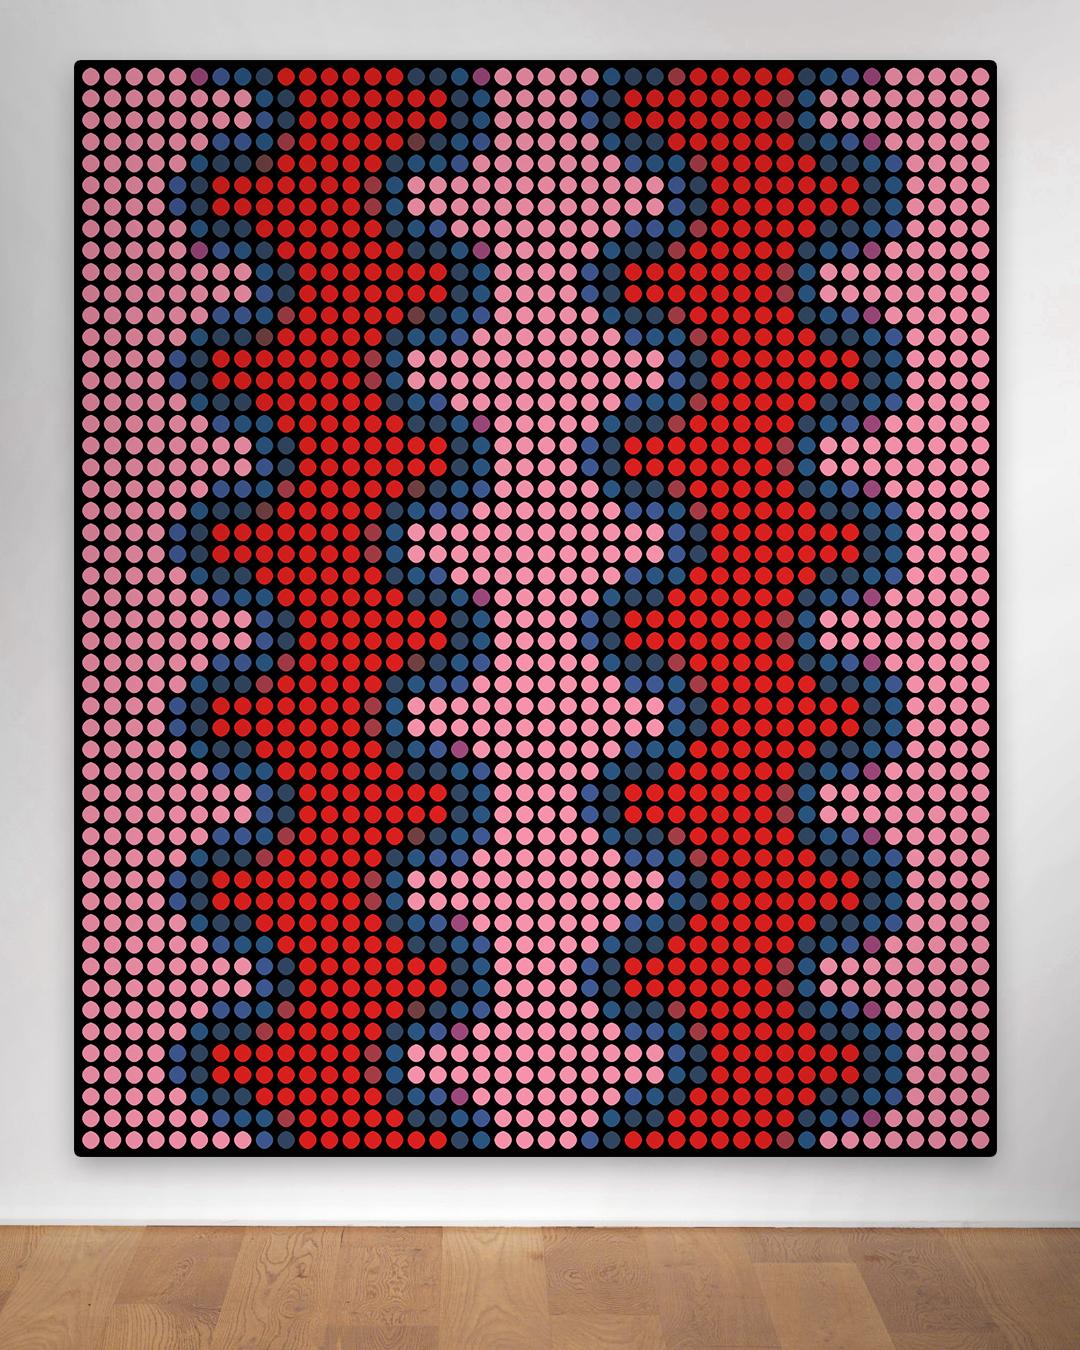 Series: Abstract
Oil Enamel Paint on Canvas

I consider each colored dot to be like a person. You and me and everyone. Together we all make up that image shown. You will notice that in my work all the dots are spread out evenly in a grid. The grid